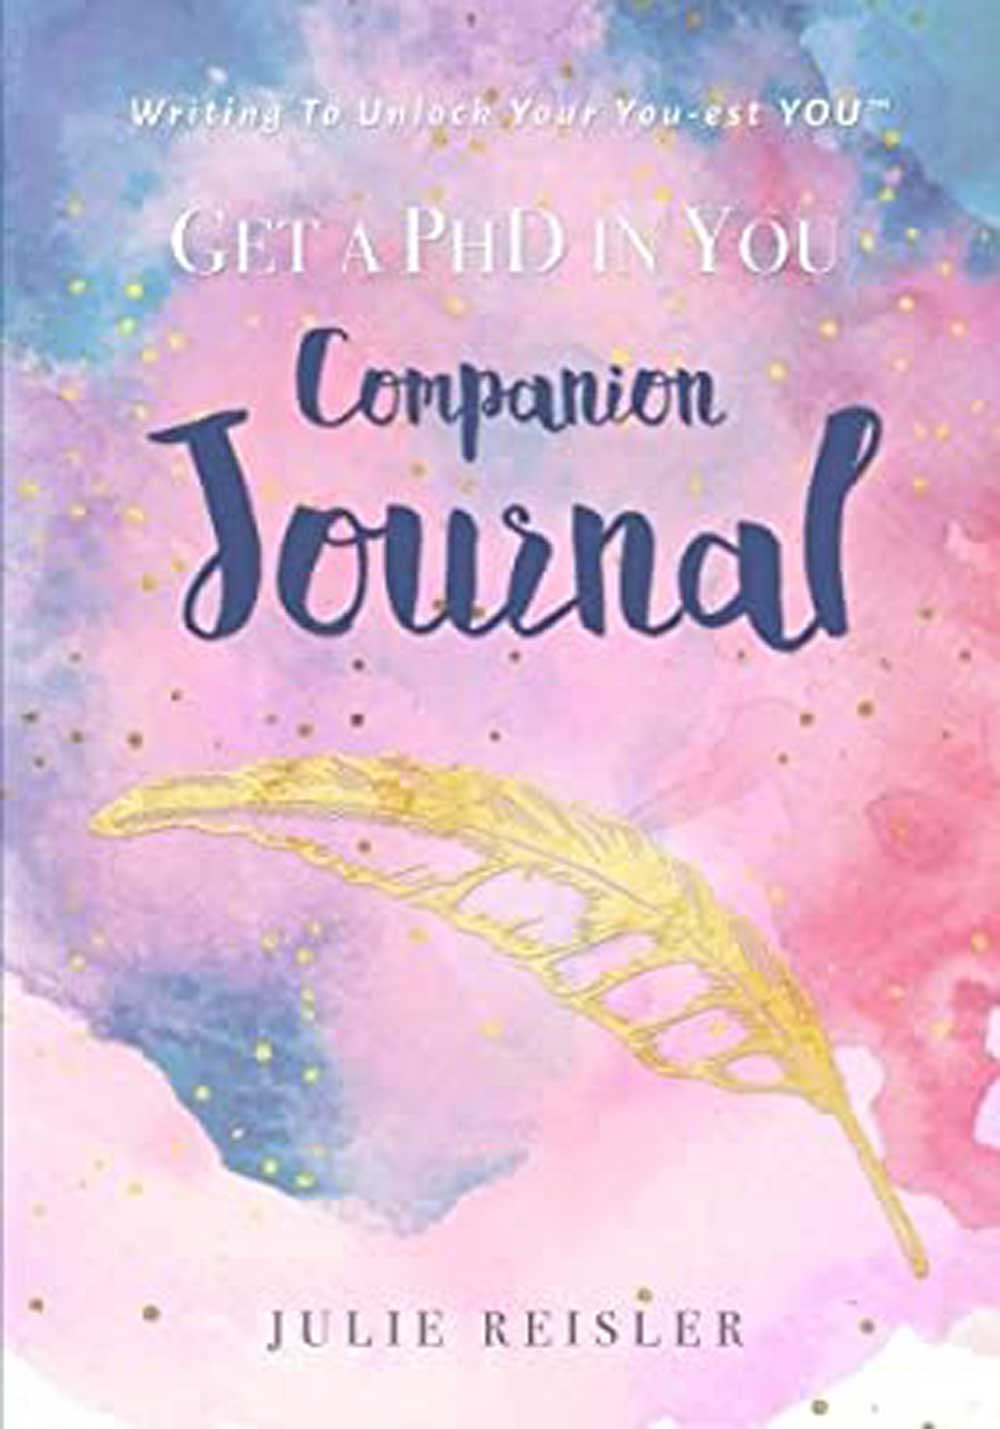 Get a PhD in YOU Journal